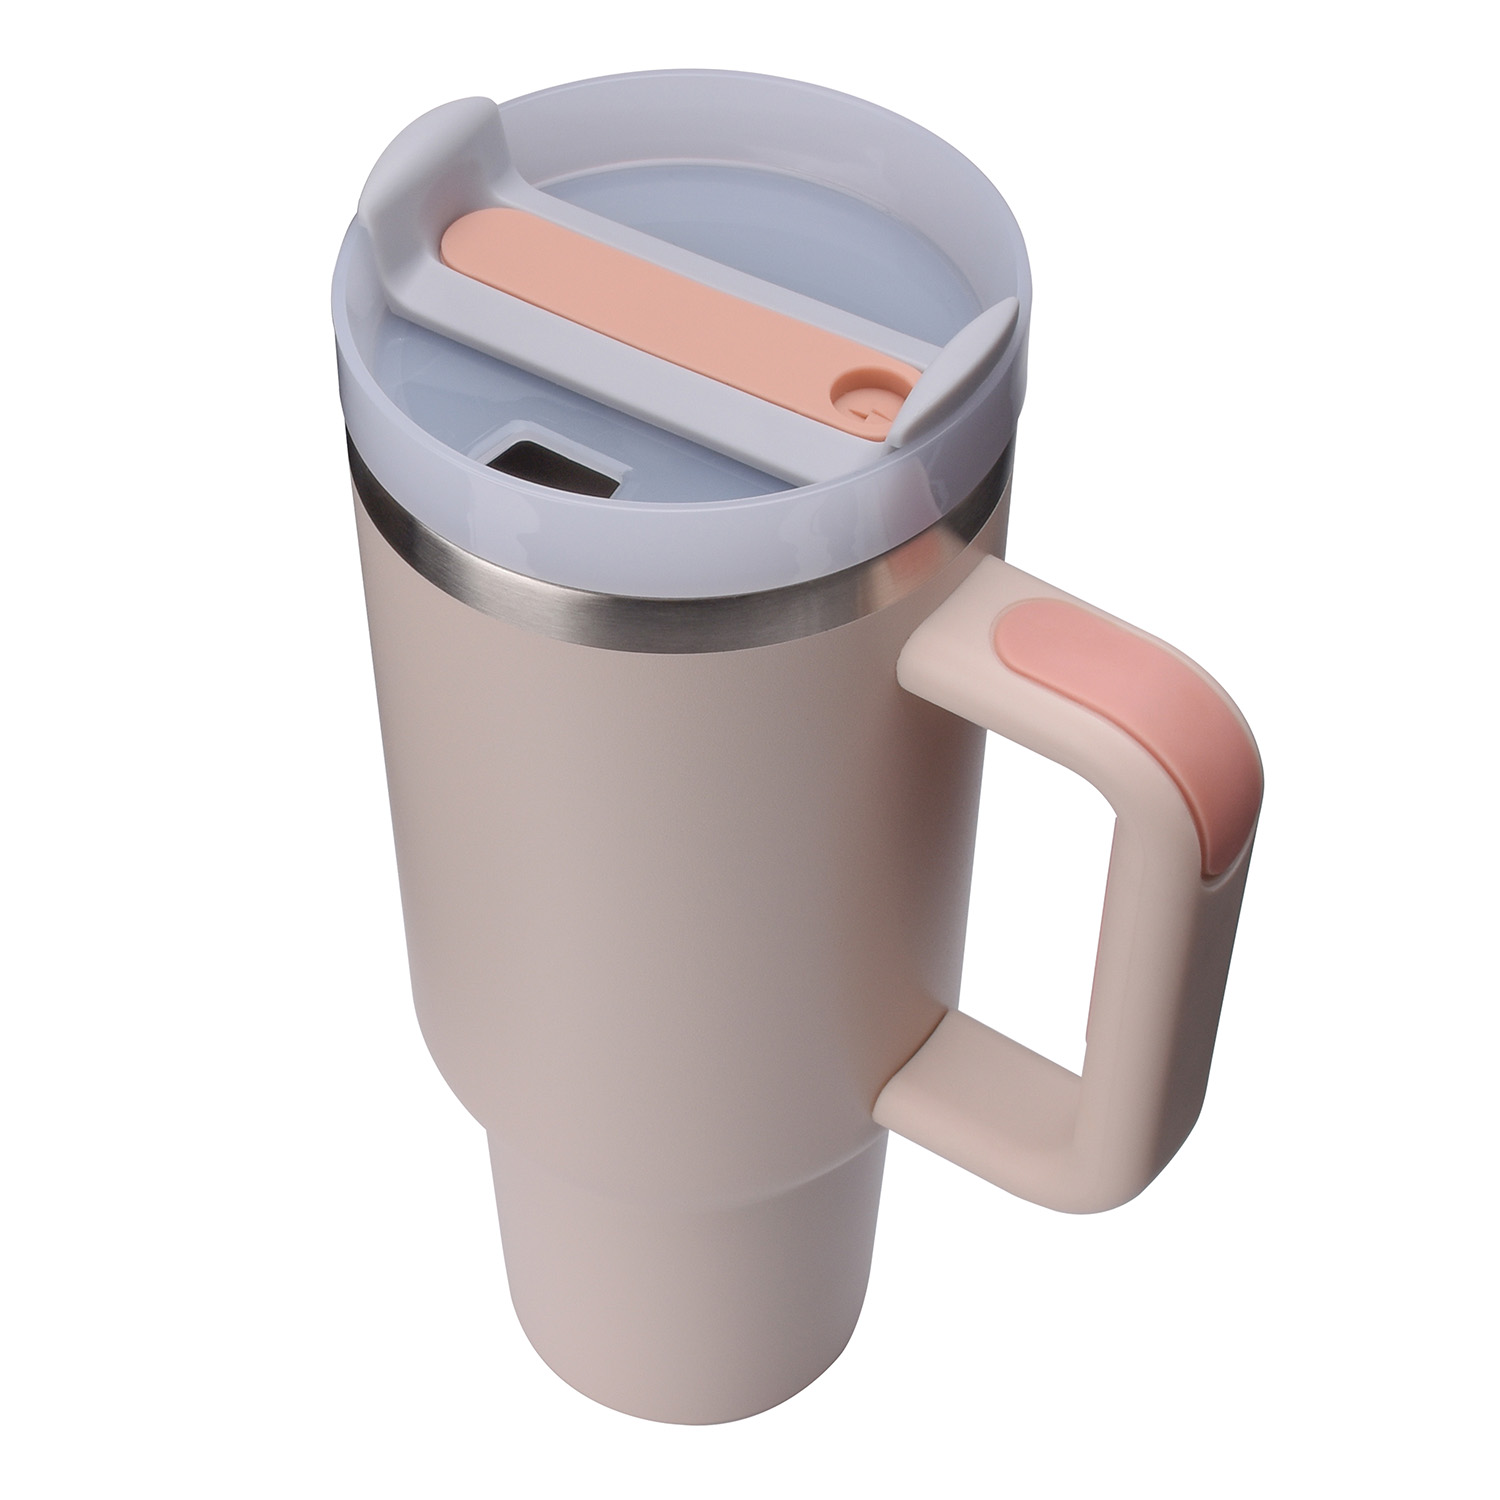 Stanley Quencher H2.0 40oz Stainless Steel Tumblers Cups With Silicone  Handle Lid And Straw 2nd Generation Car Brumate Mug Keep Drinking Cold  Water Bottles With Logo GJ0522 From Cinderelladress, $4.14